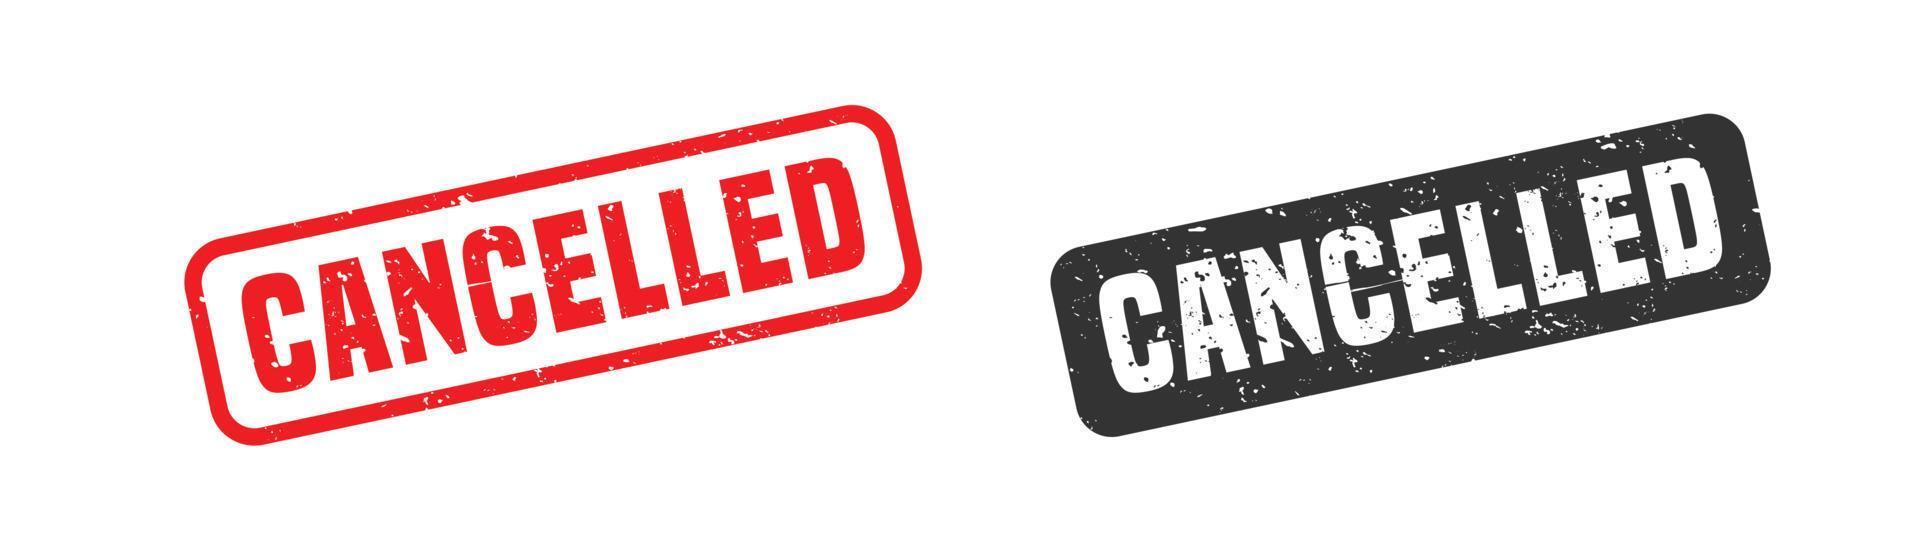 Cancelled stamp rubber with grunge style on white background. vector